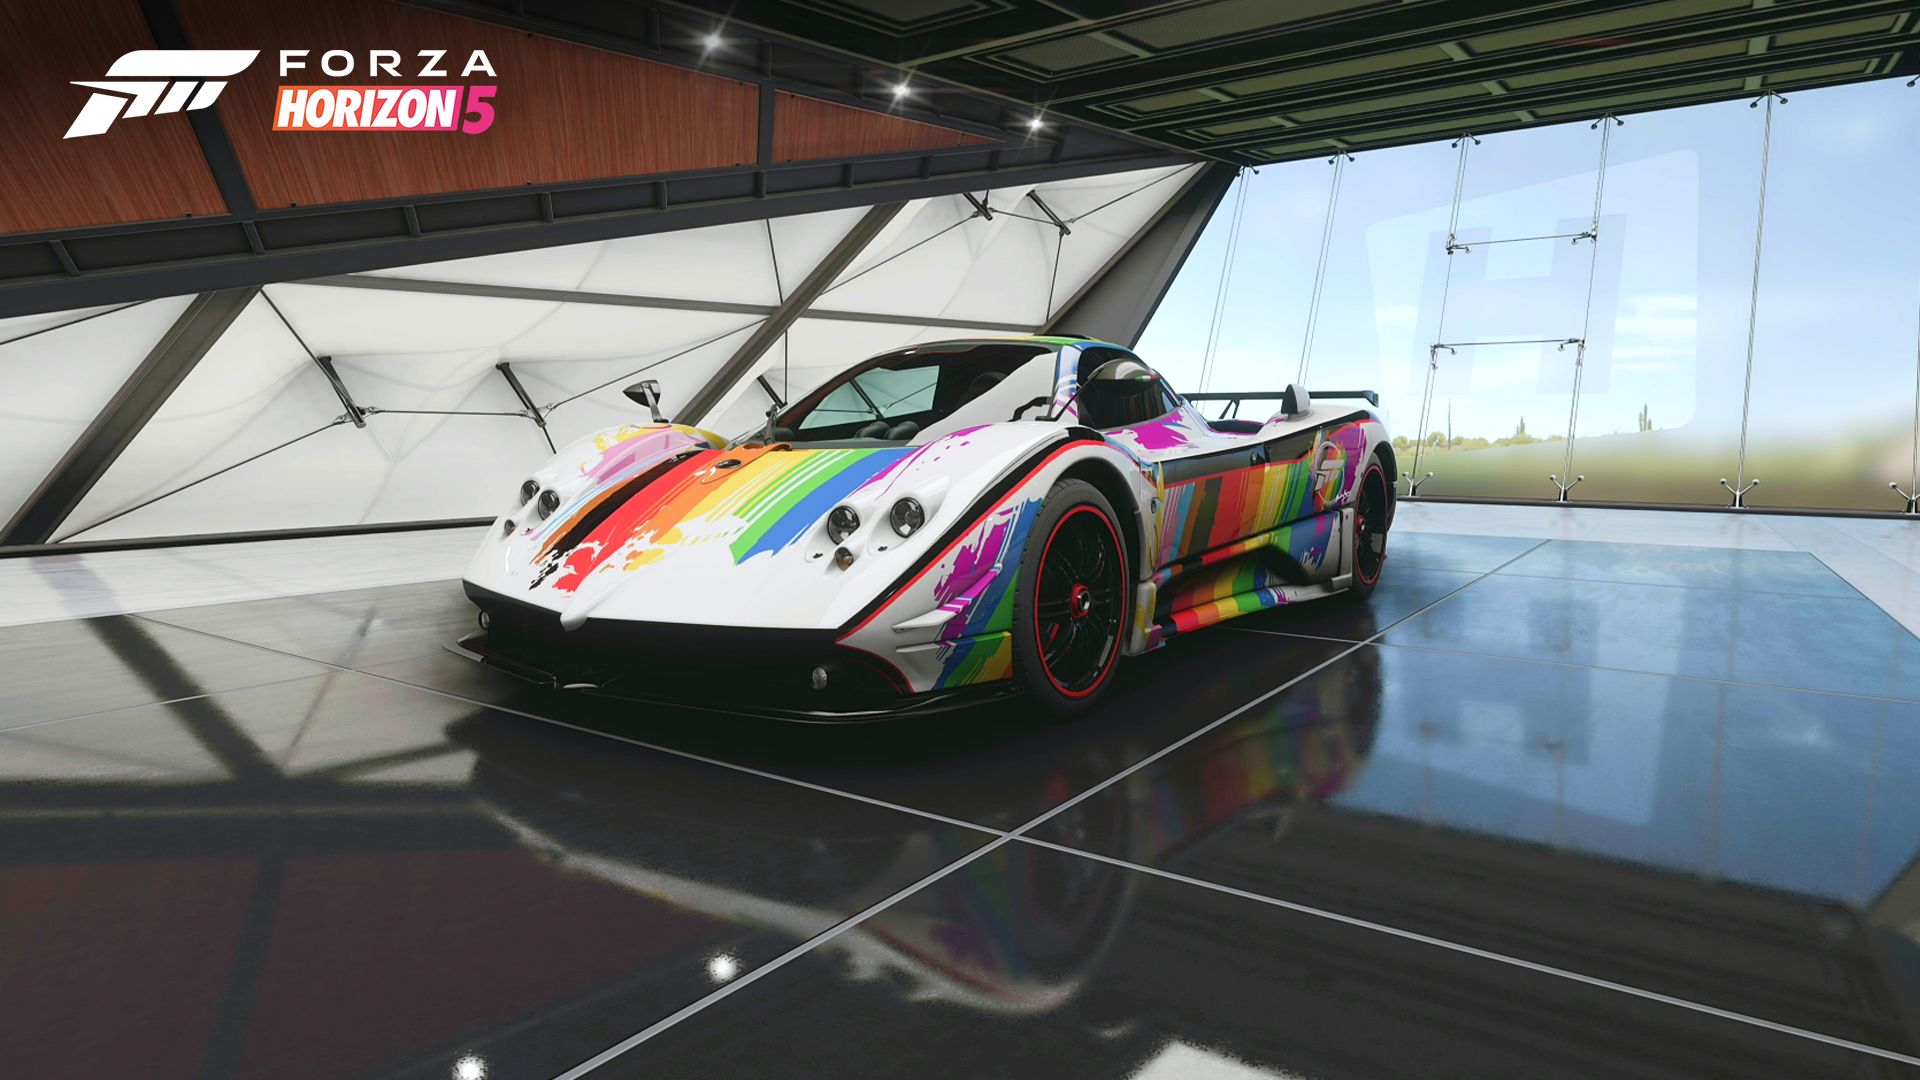 A 2009 Pagani Zonda Roadster is parked inside a sleek garage at the Horizon Festival. Its white body is painted with bold, graphical stripes in all colors of the rainbow, correlating to the colors of the Pride flag.